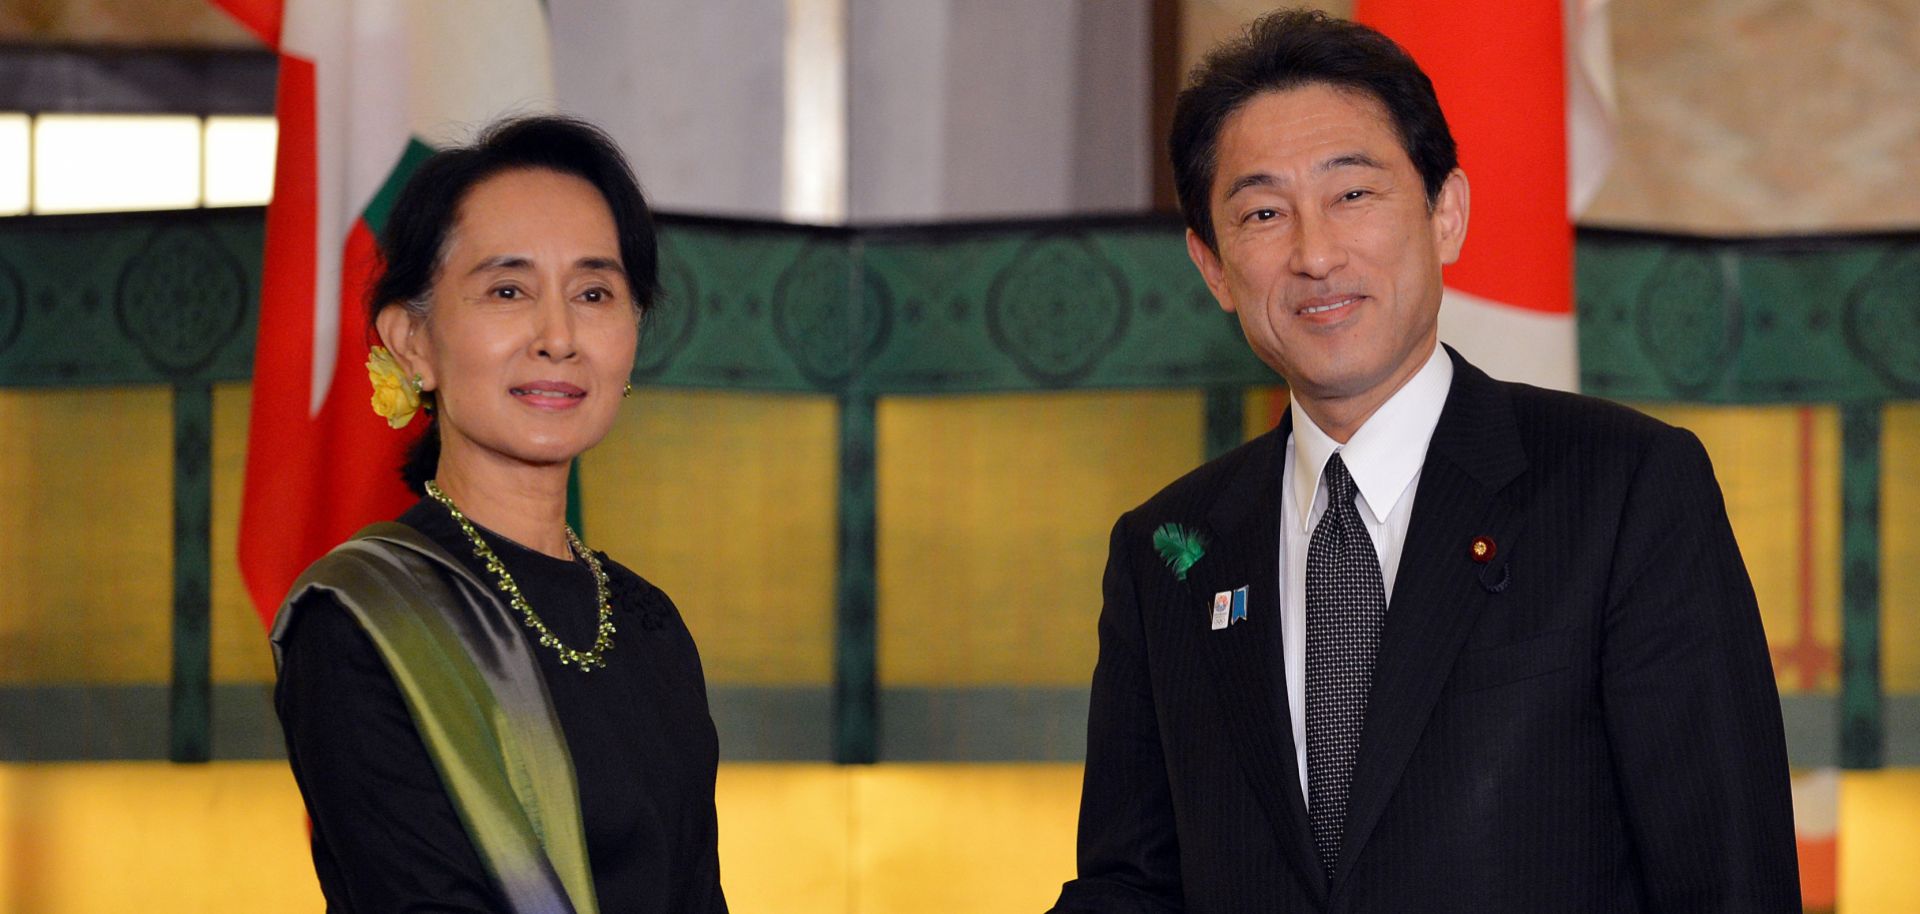 Myanmar's democracy leader Aung San Suu Kyi (L) shakes hands with Japanese Foreign Minister Fumio Kishida prior to their talks at the Iikura guesthouse in Tokyo on April 16, 2013. 